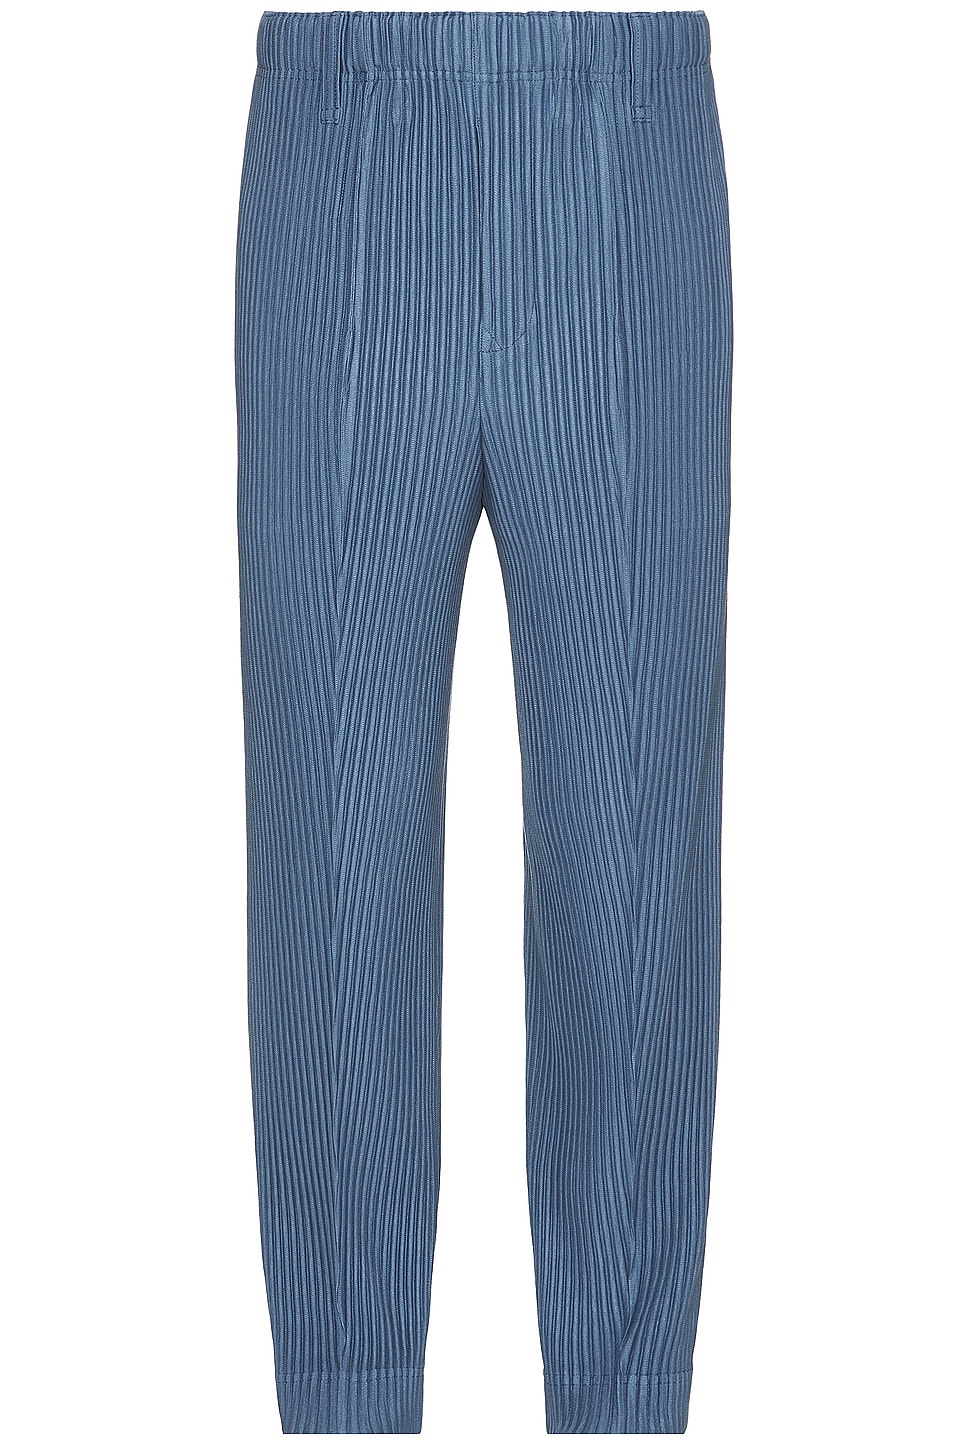 Image 1 of Homme Plisse Issey Miyake Compleat Trousers in Blue Grey